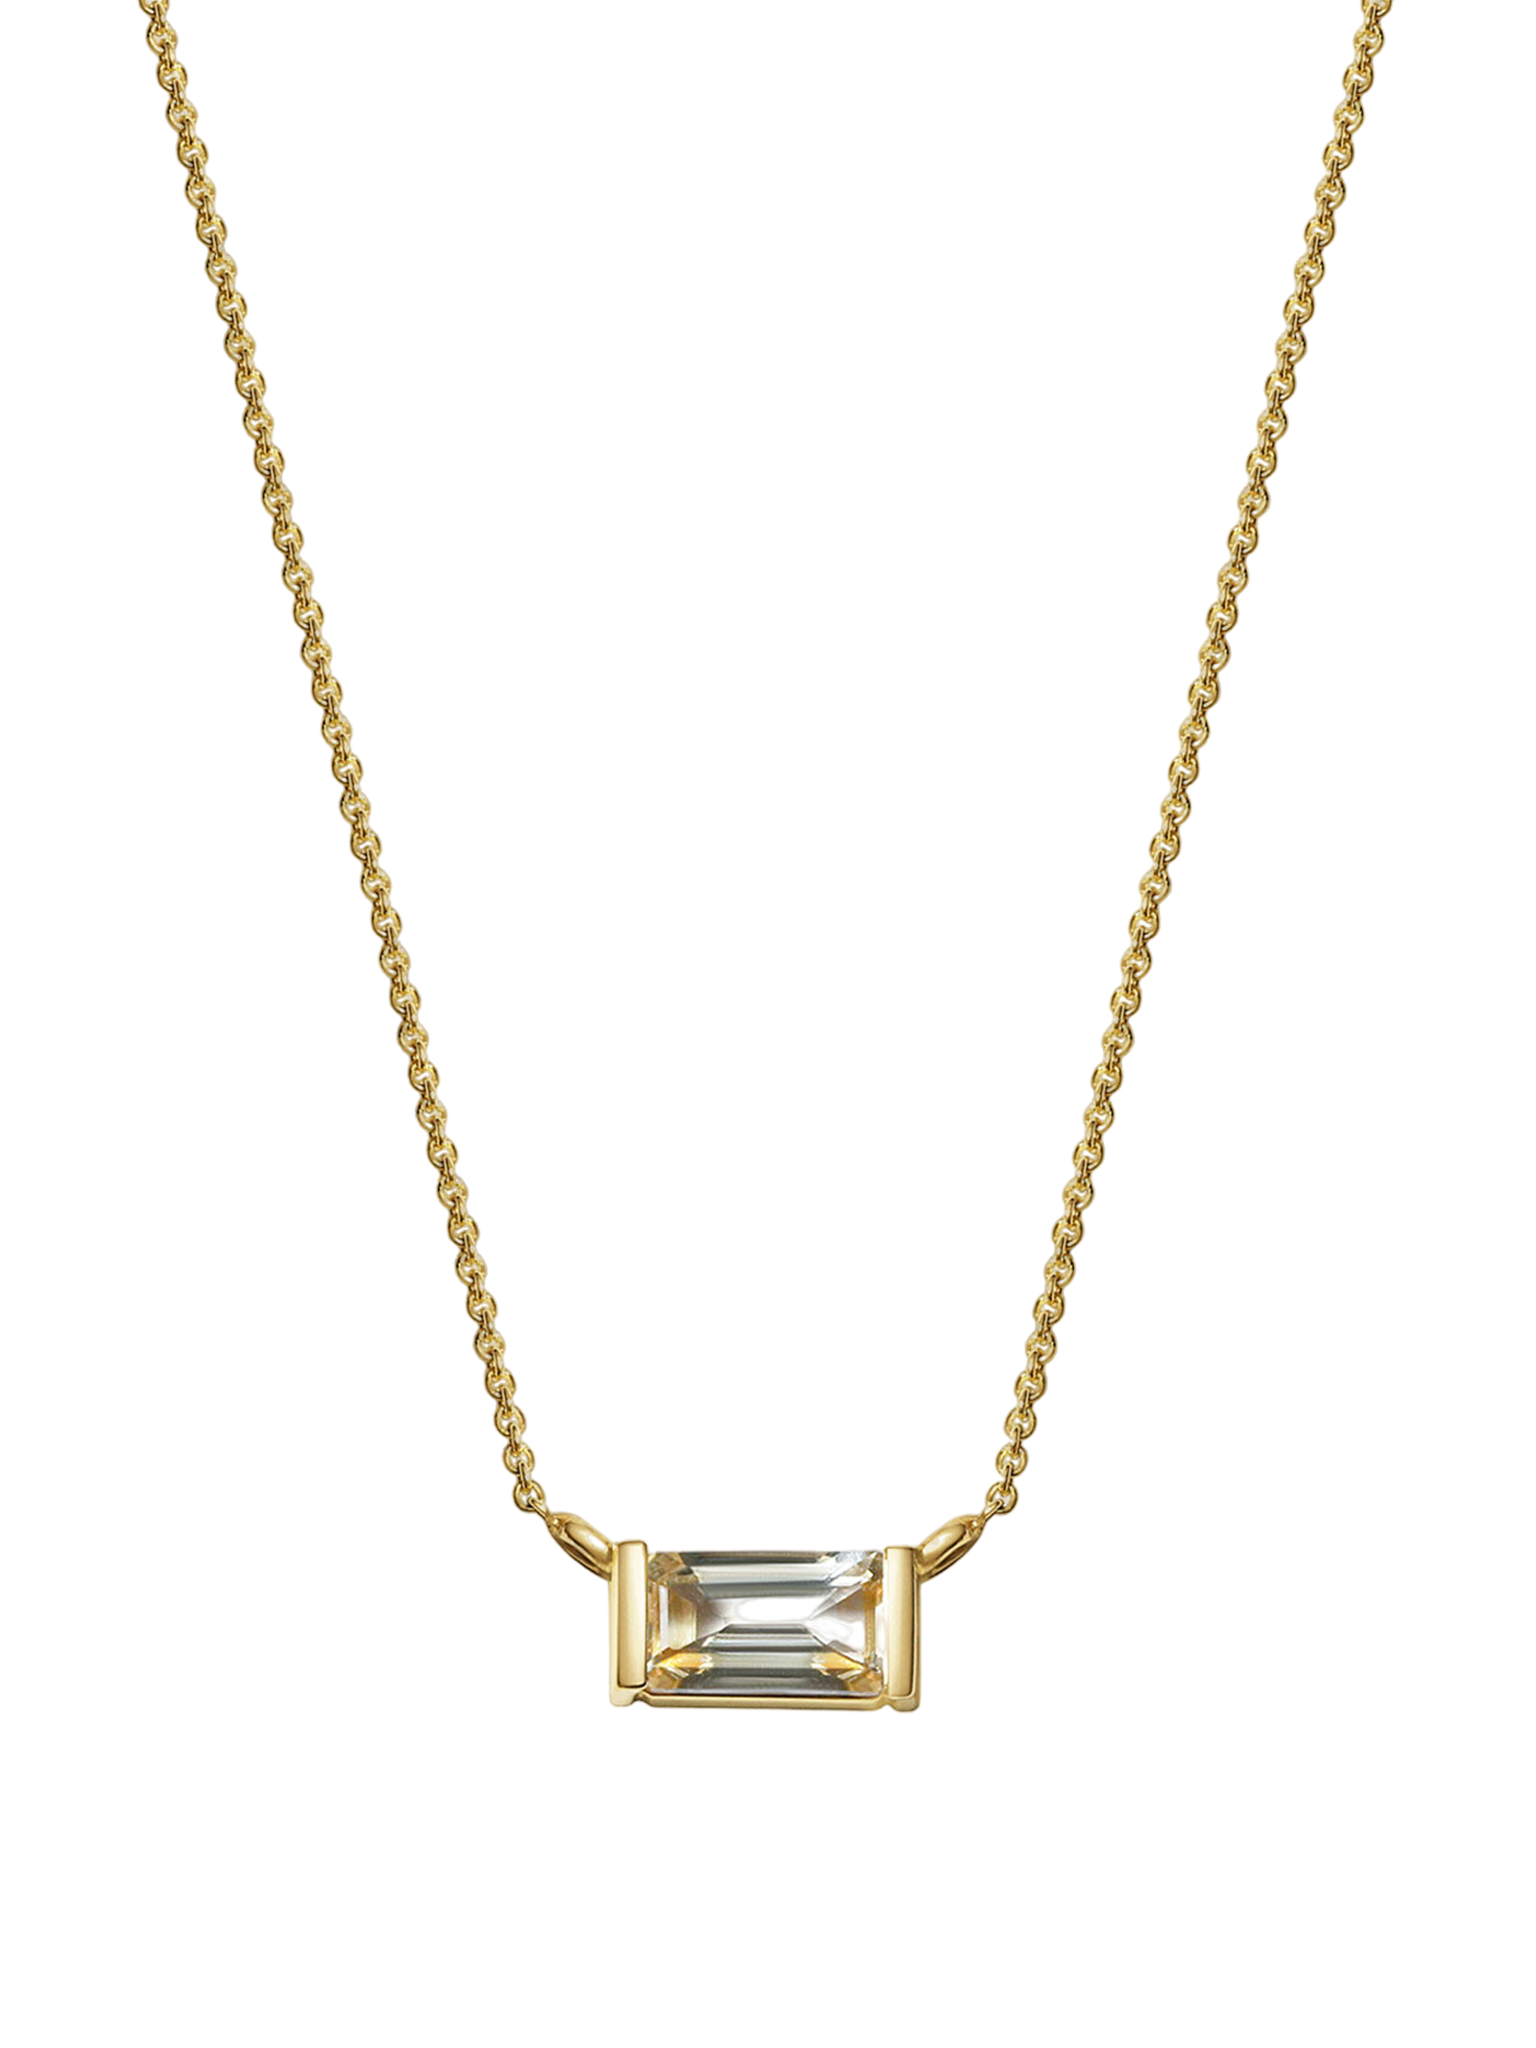 Sher-gil necklace